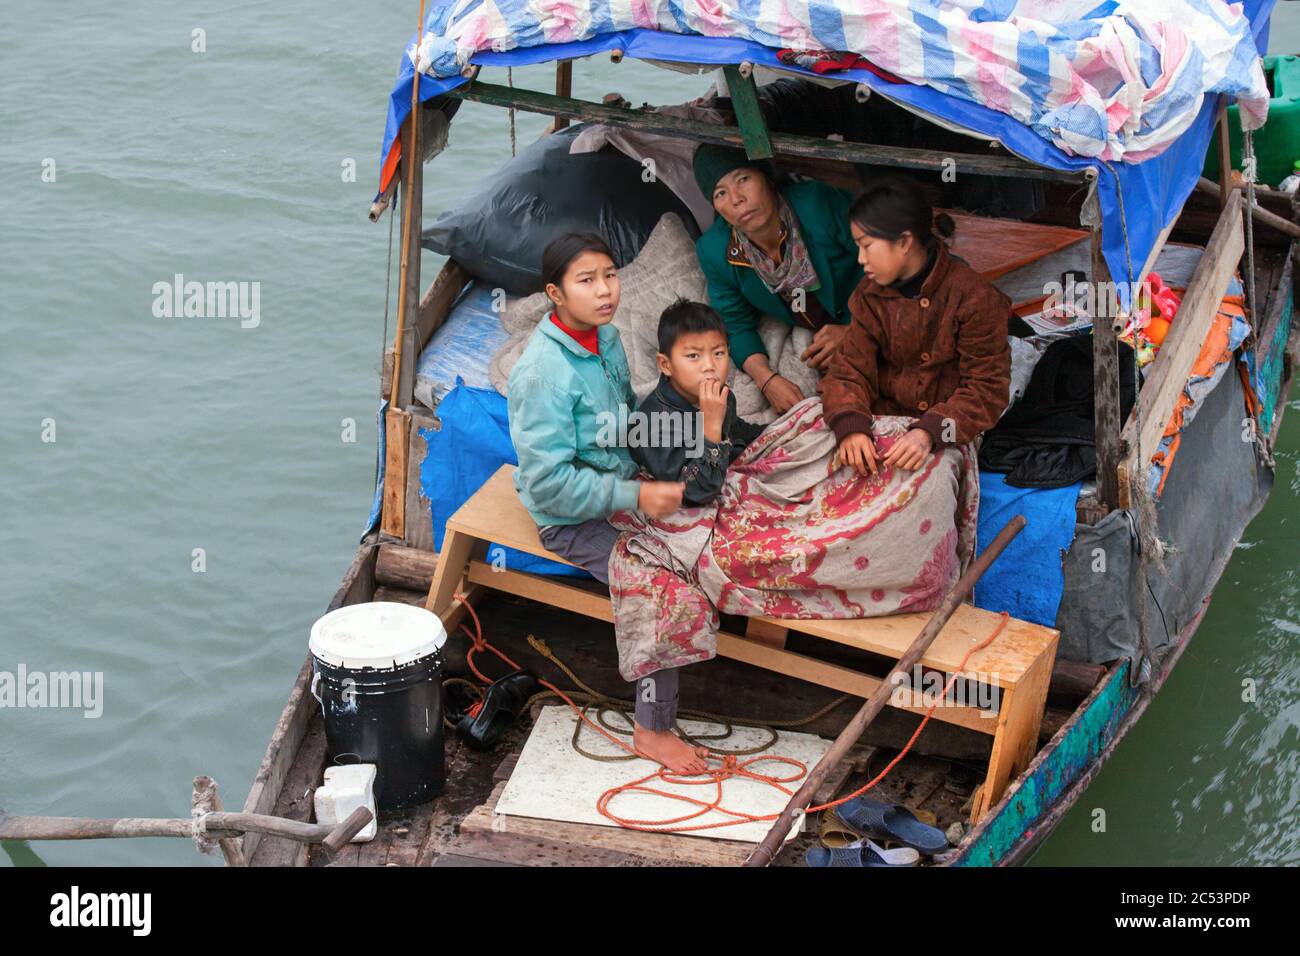 poor Vietnamese family members living in a house boat, poverty vietnam,halong bay,vietnames family,poor people,asia poor people,halong bay vietnam Stock Photo